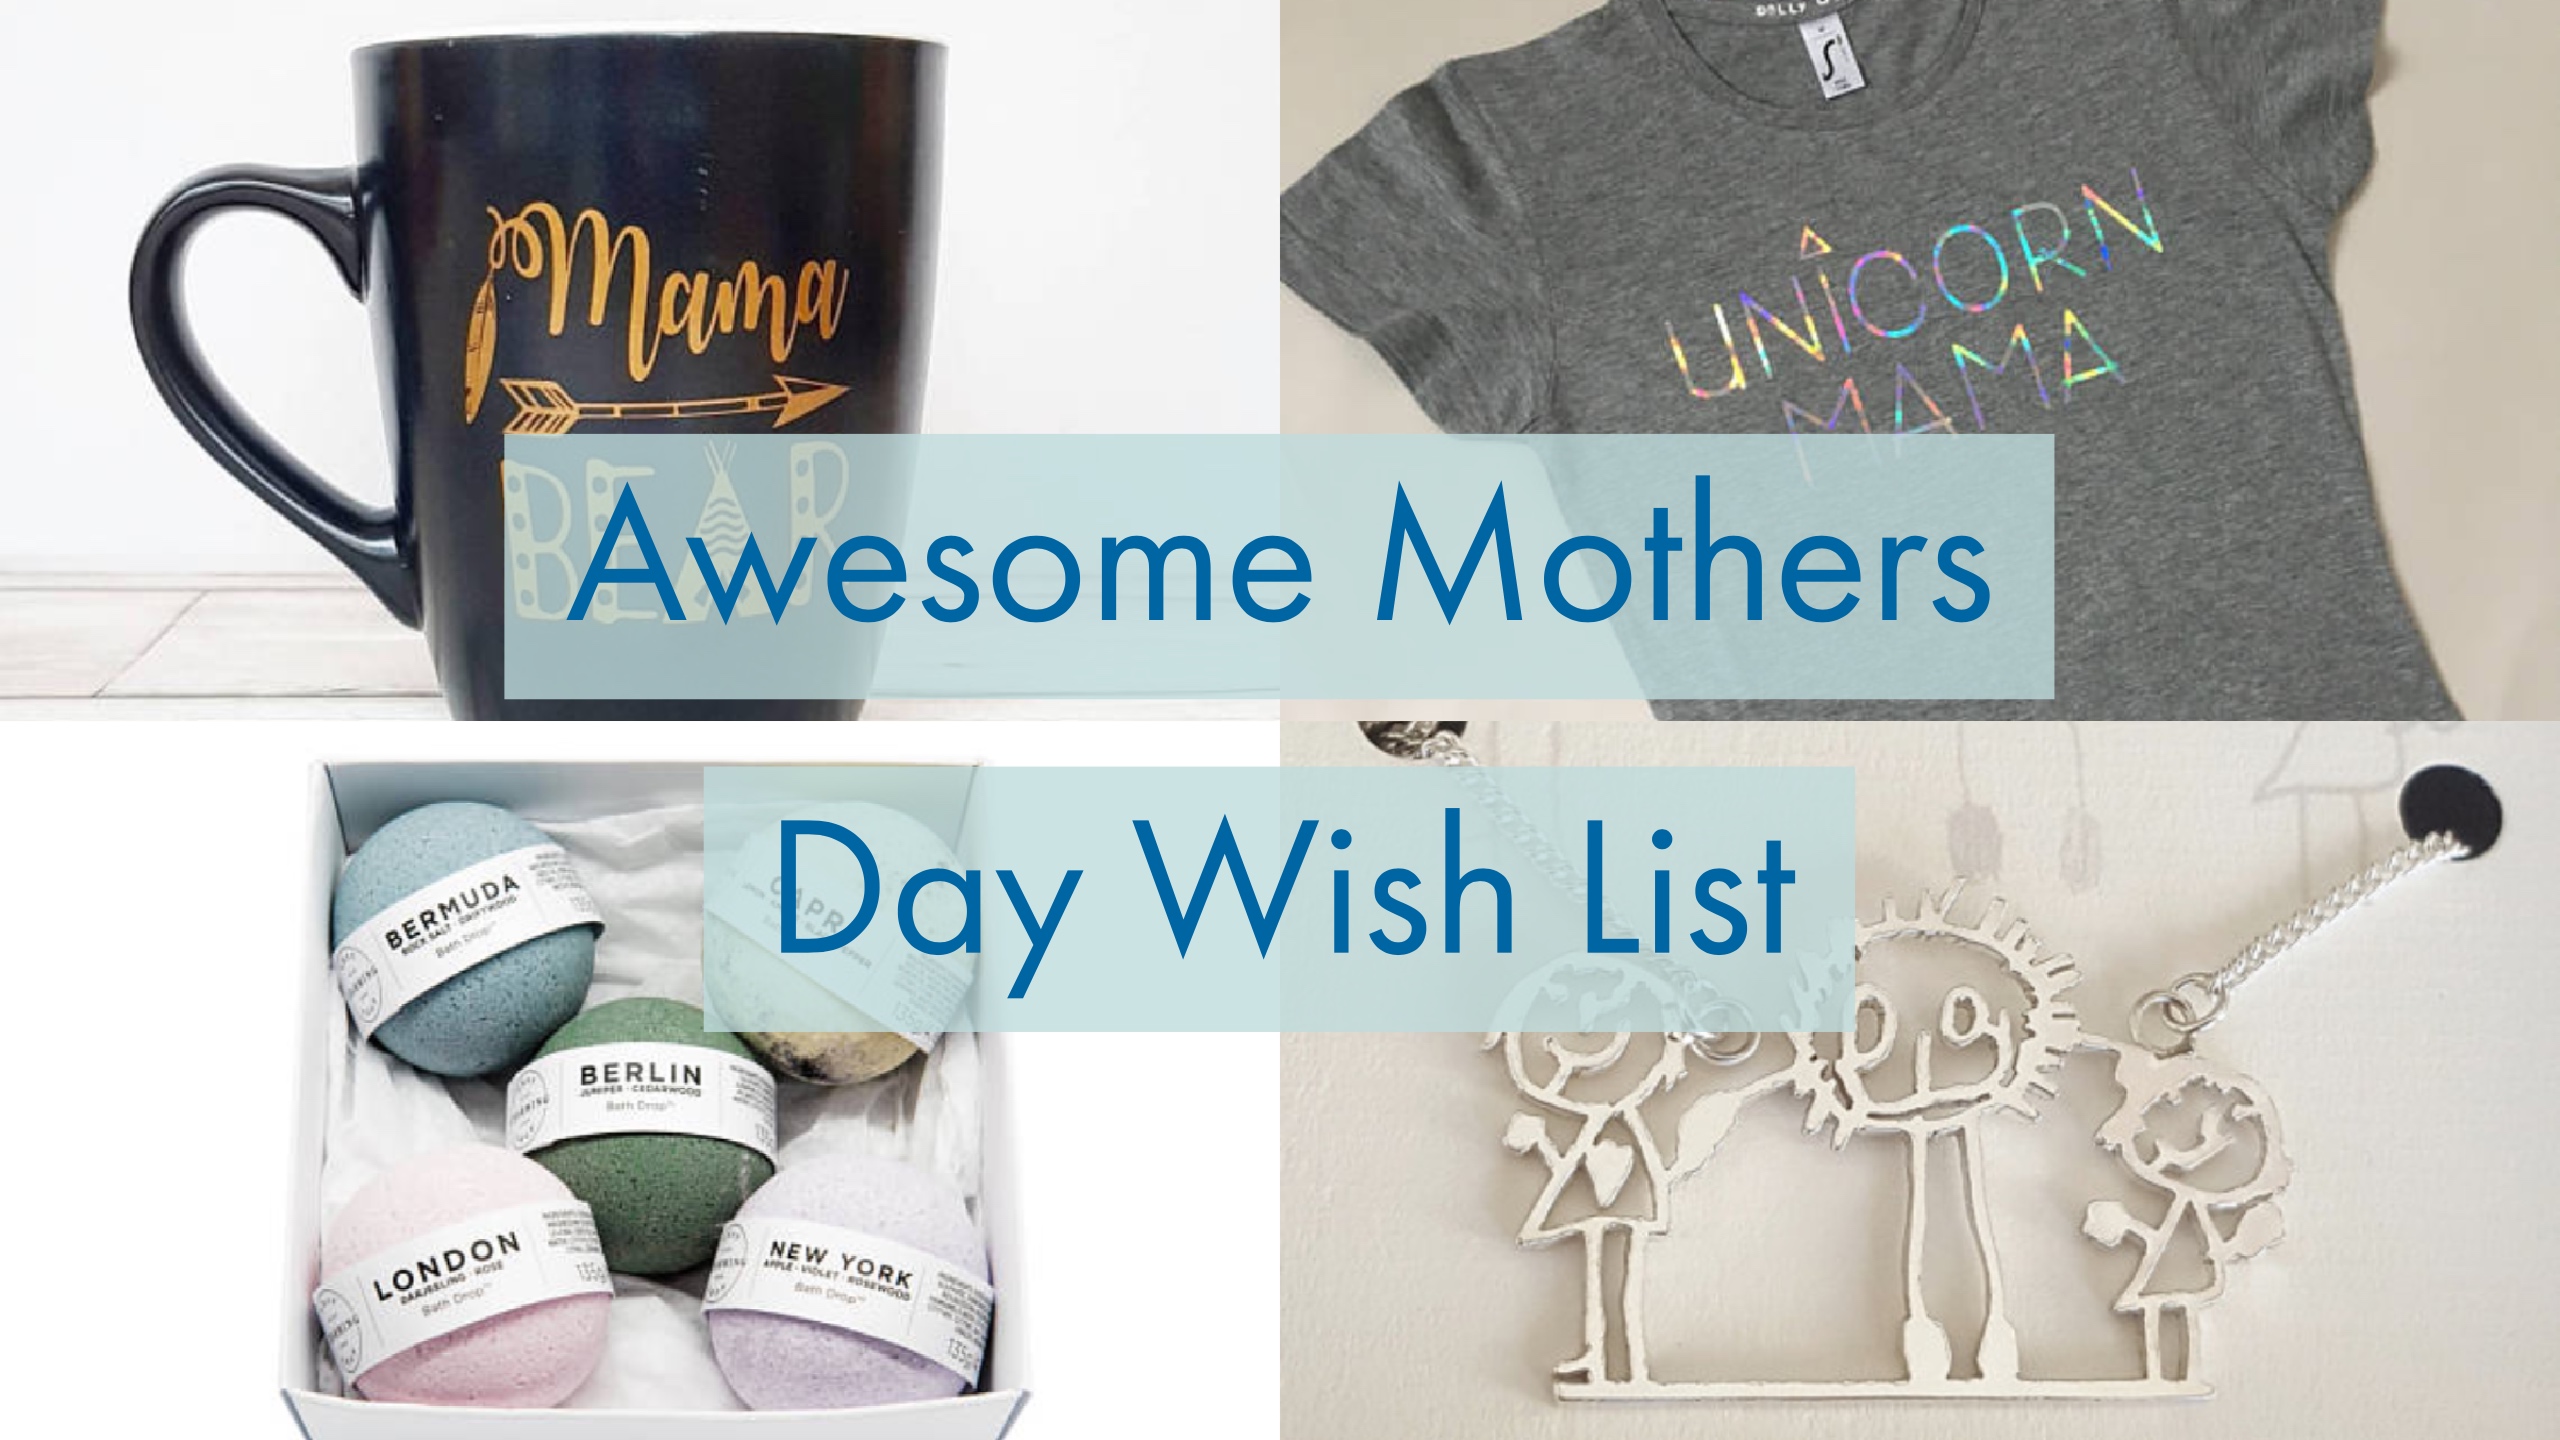 Mothers Day Gift Ideas from Etsy - Awesome Mothers Day Gifts